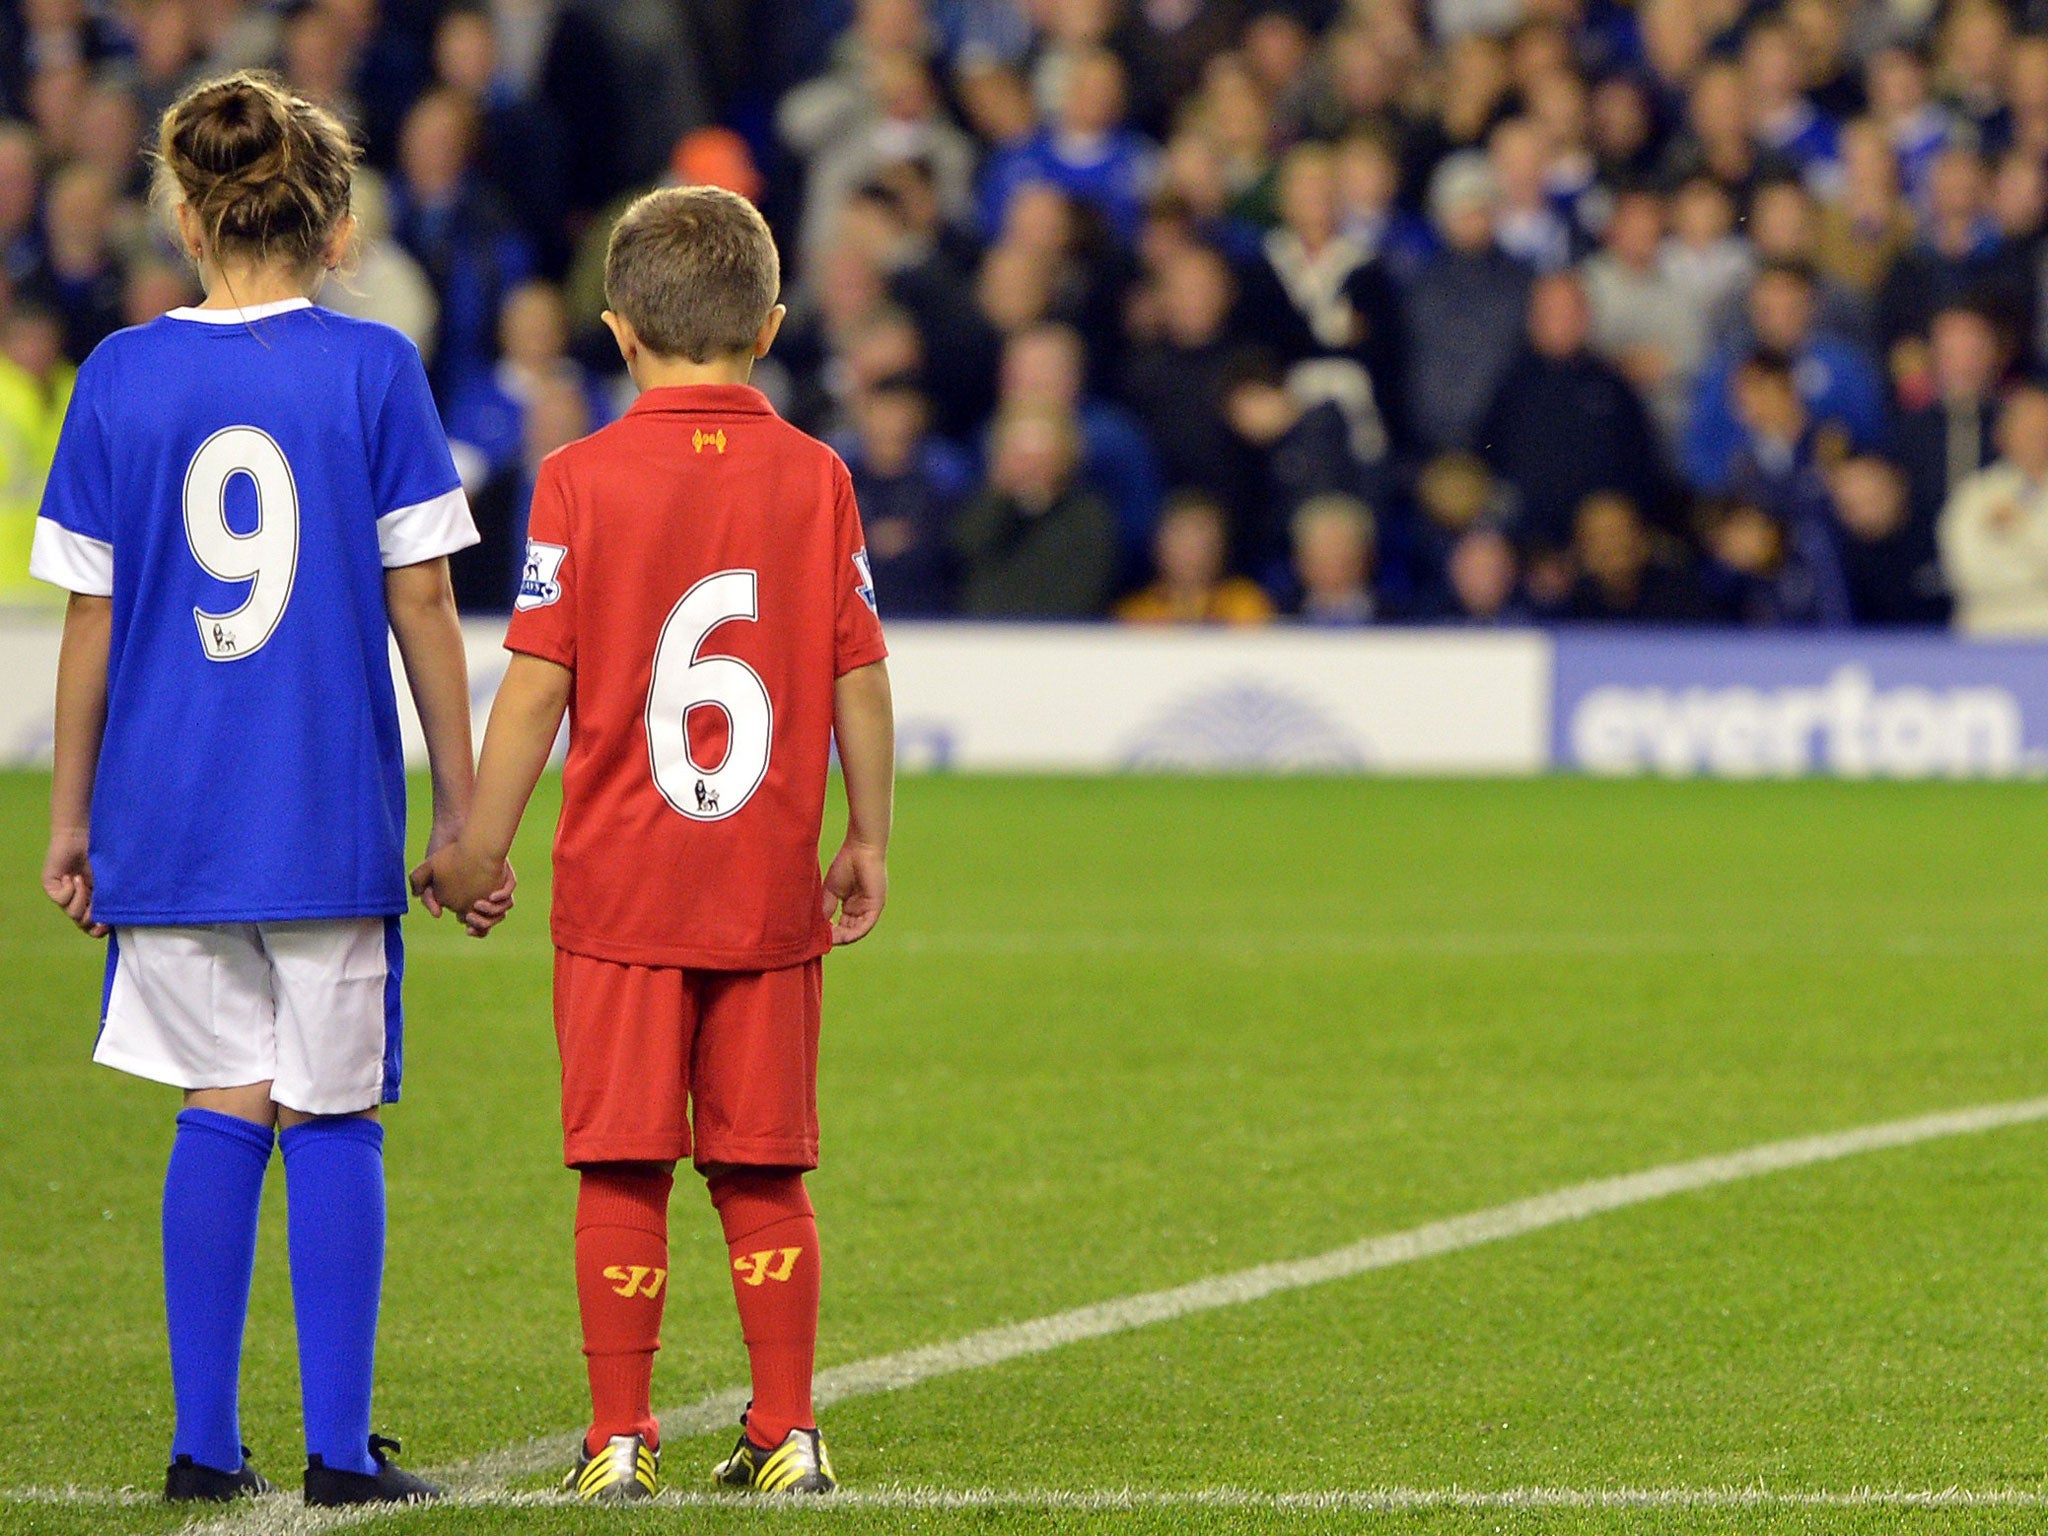 Show of hands: The Everton-Liverpool tribute to the 96 created the most striking football image of the year